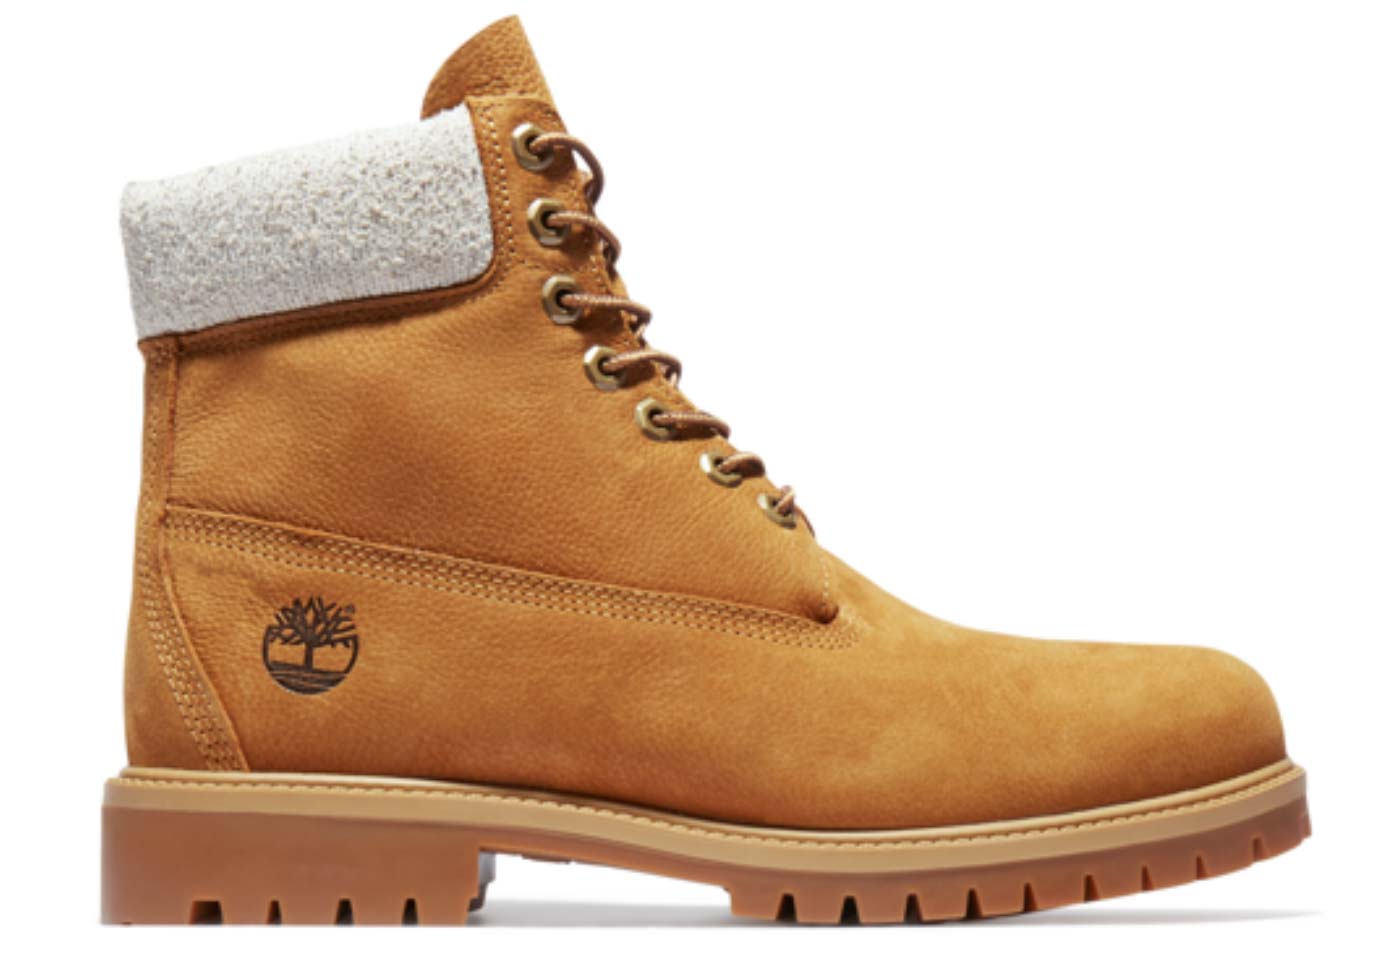 Timberland Regenerative Leather Boots for Men - Land to Market Gift Guide